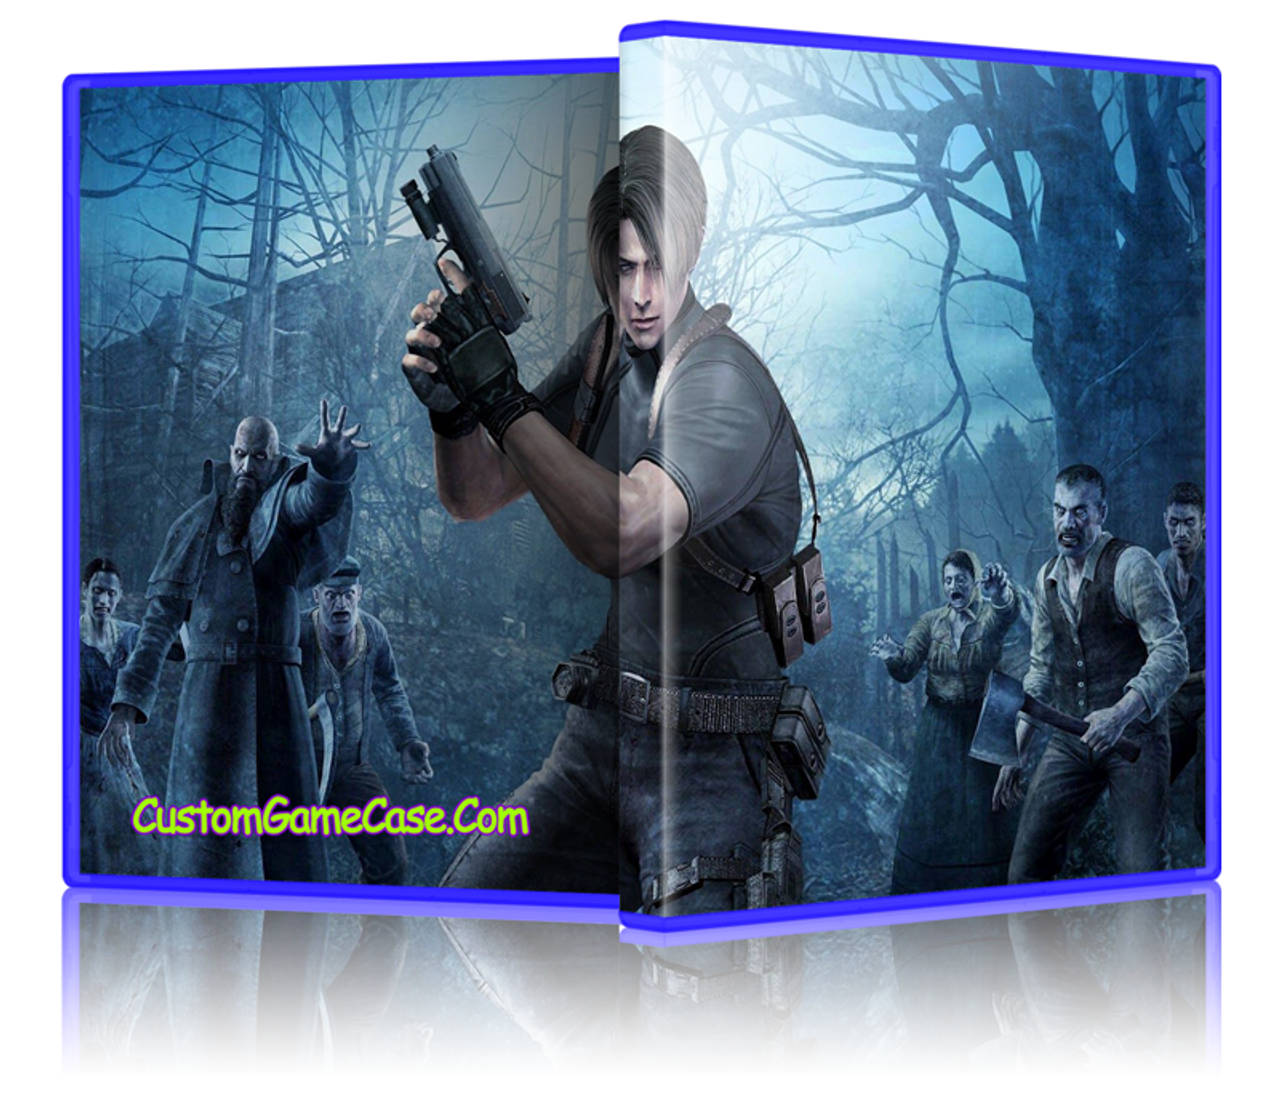 Custom Replacement Case Resident Evil 4 Remake NO DISC PS5 